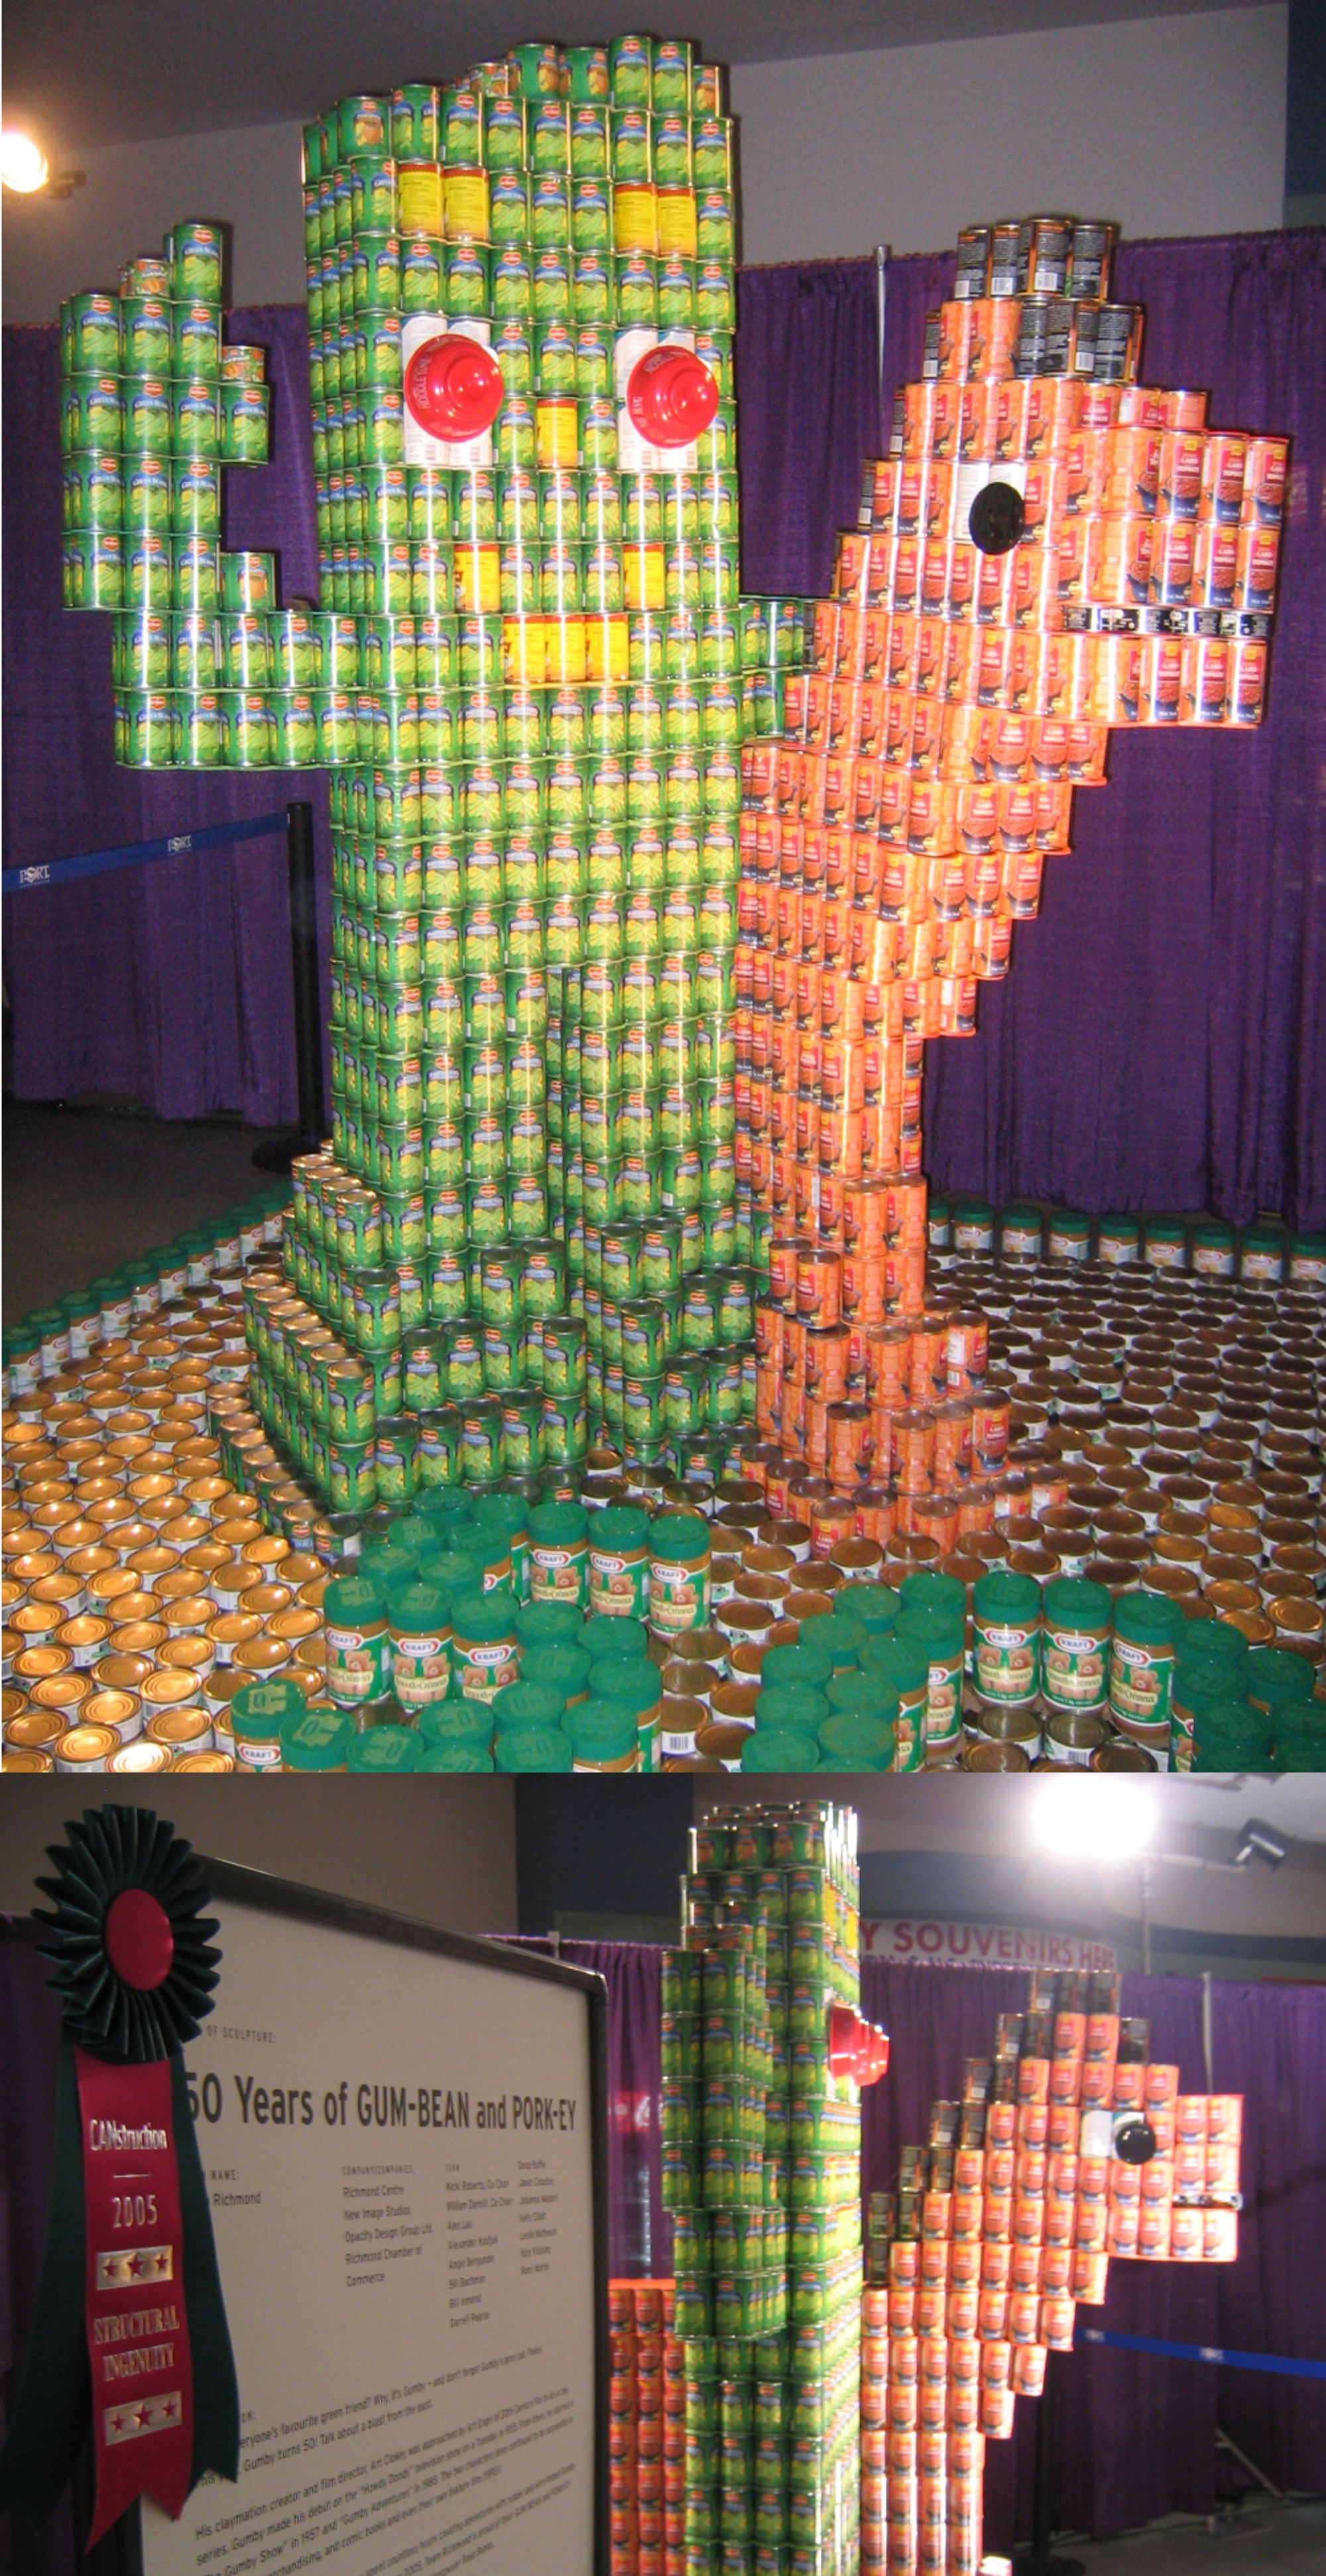 Gumby and Pokey sculptures constructed out of cans of beans, pork, and other food items